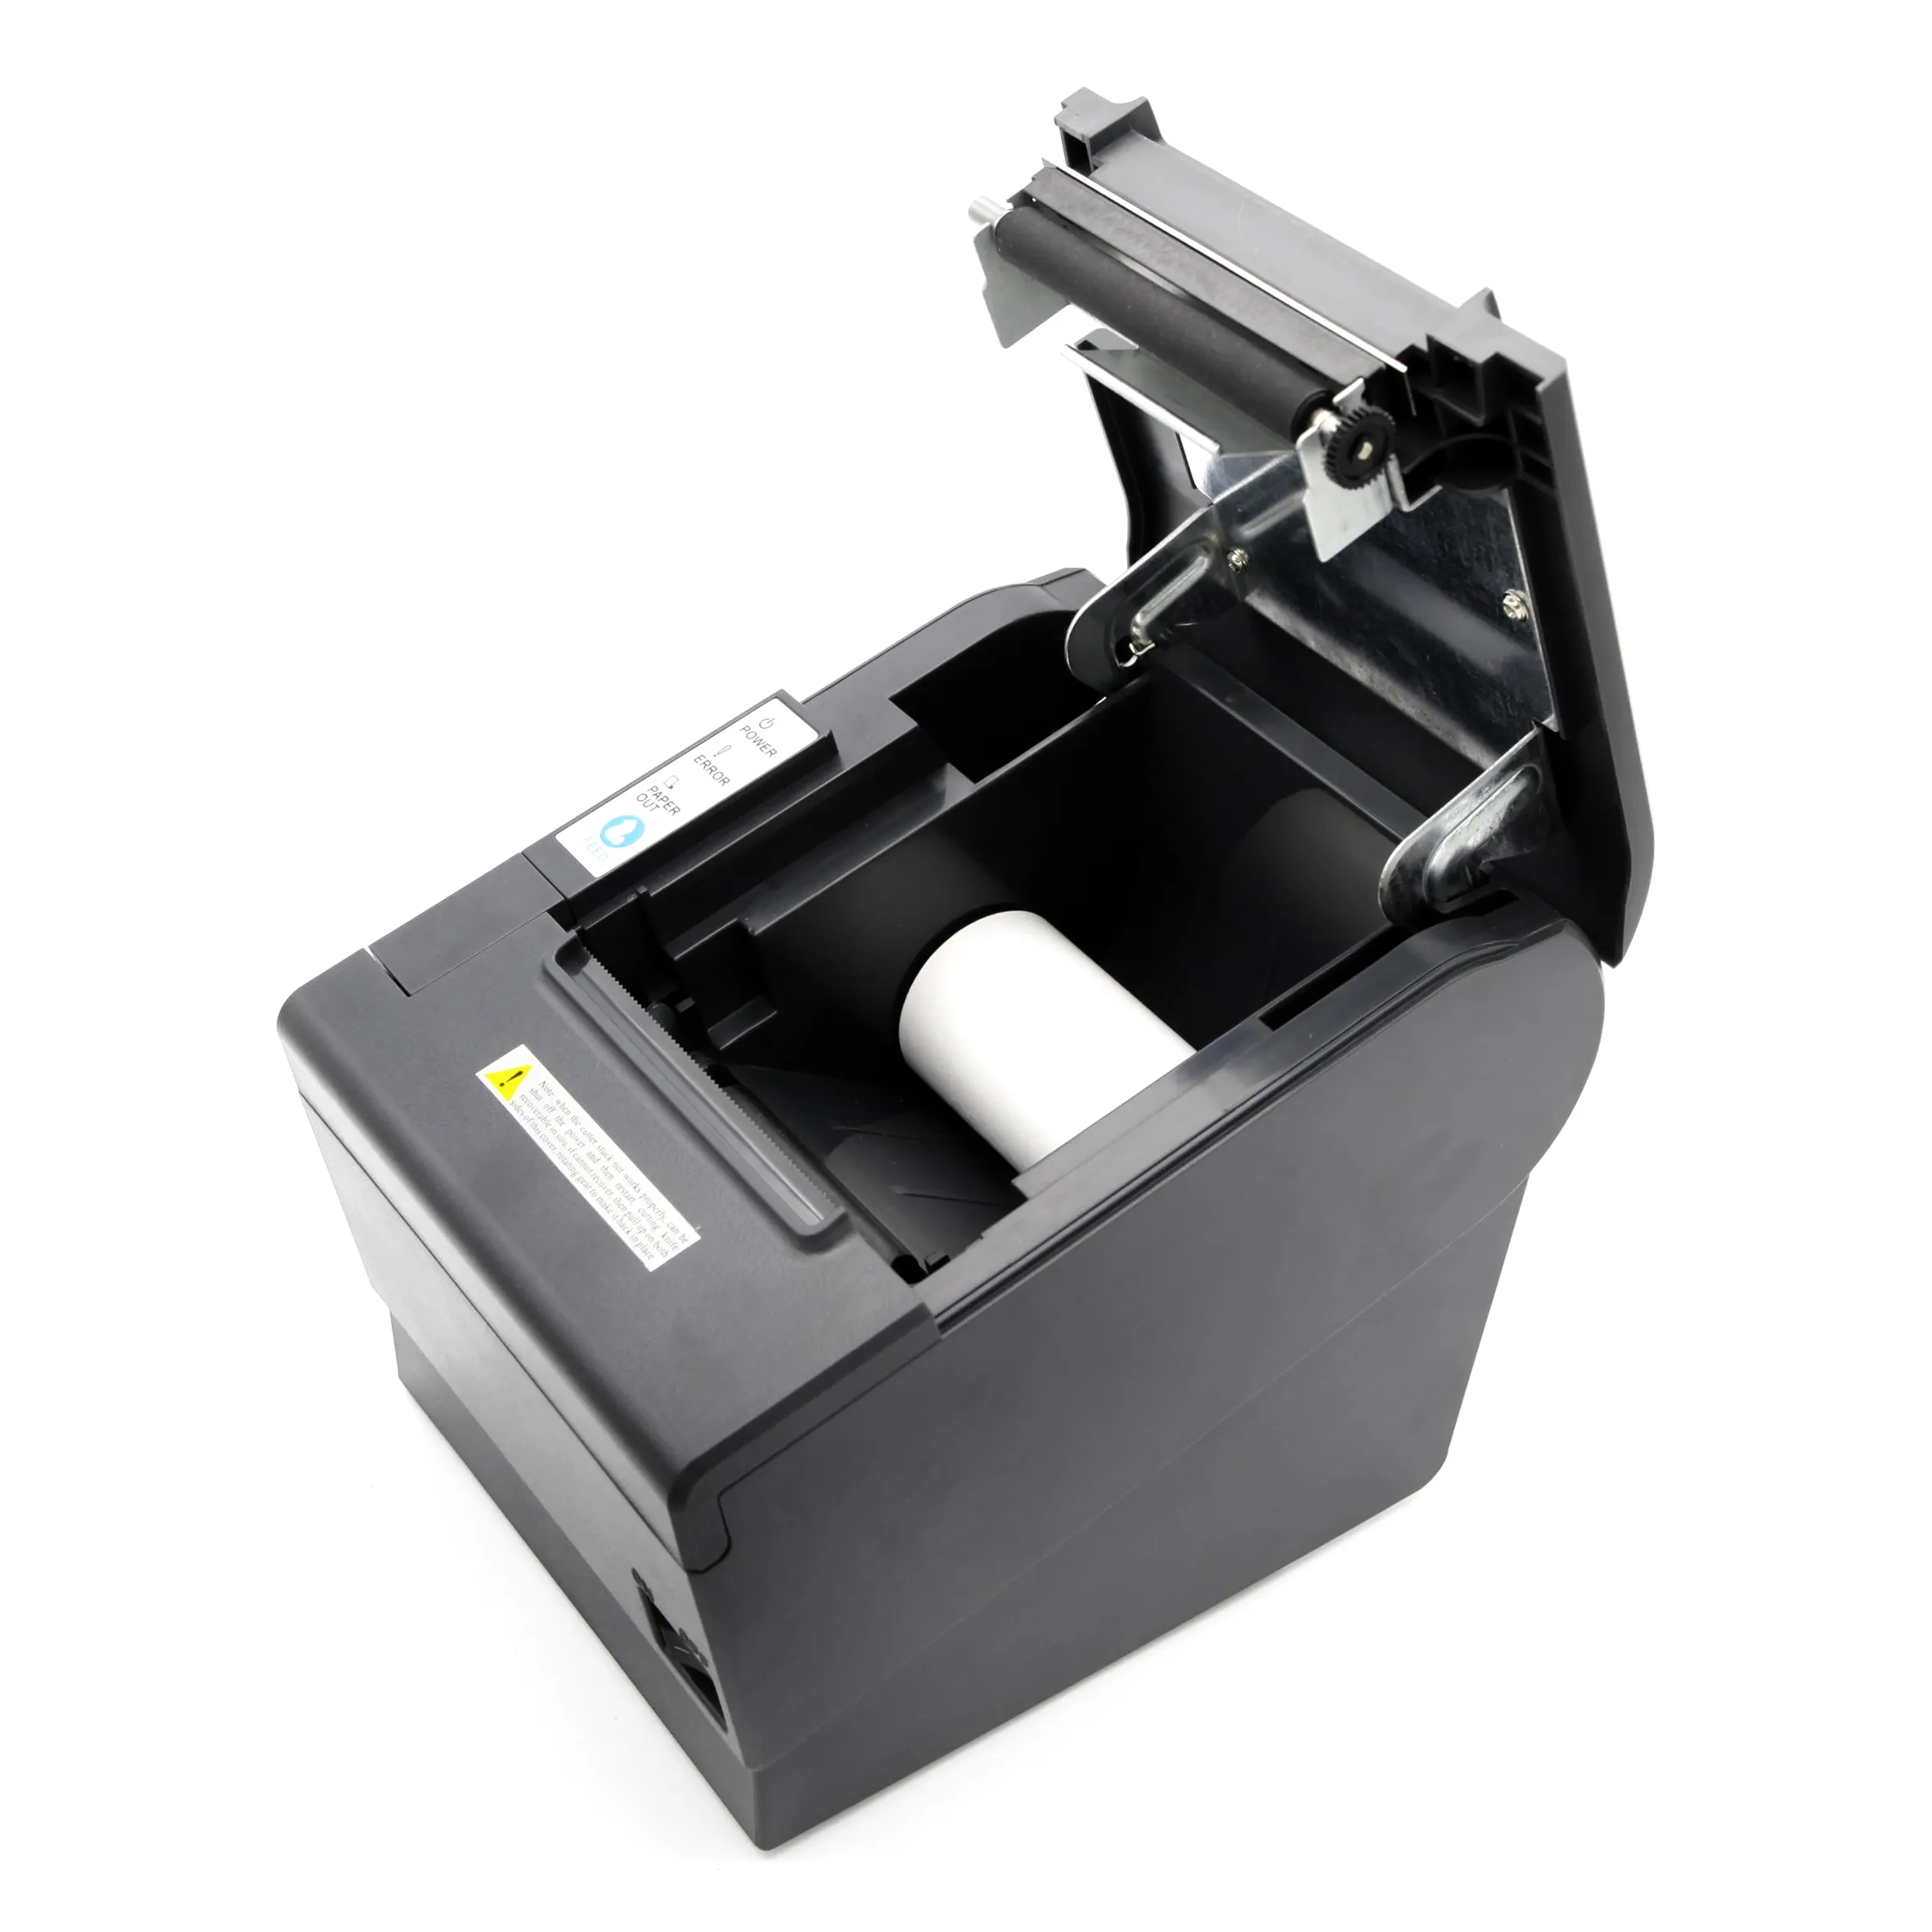 High quality and cheap 80mm thermal pos printer multiple interfaces USB/Ethernet/Parallel/Serial thermal receipt printer